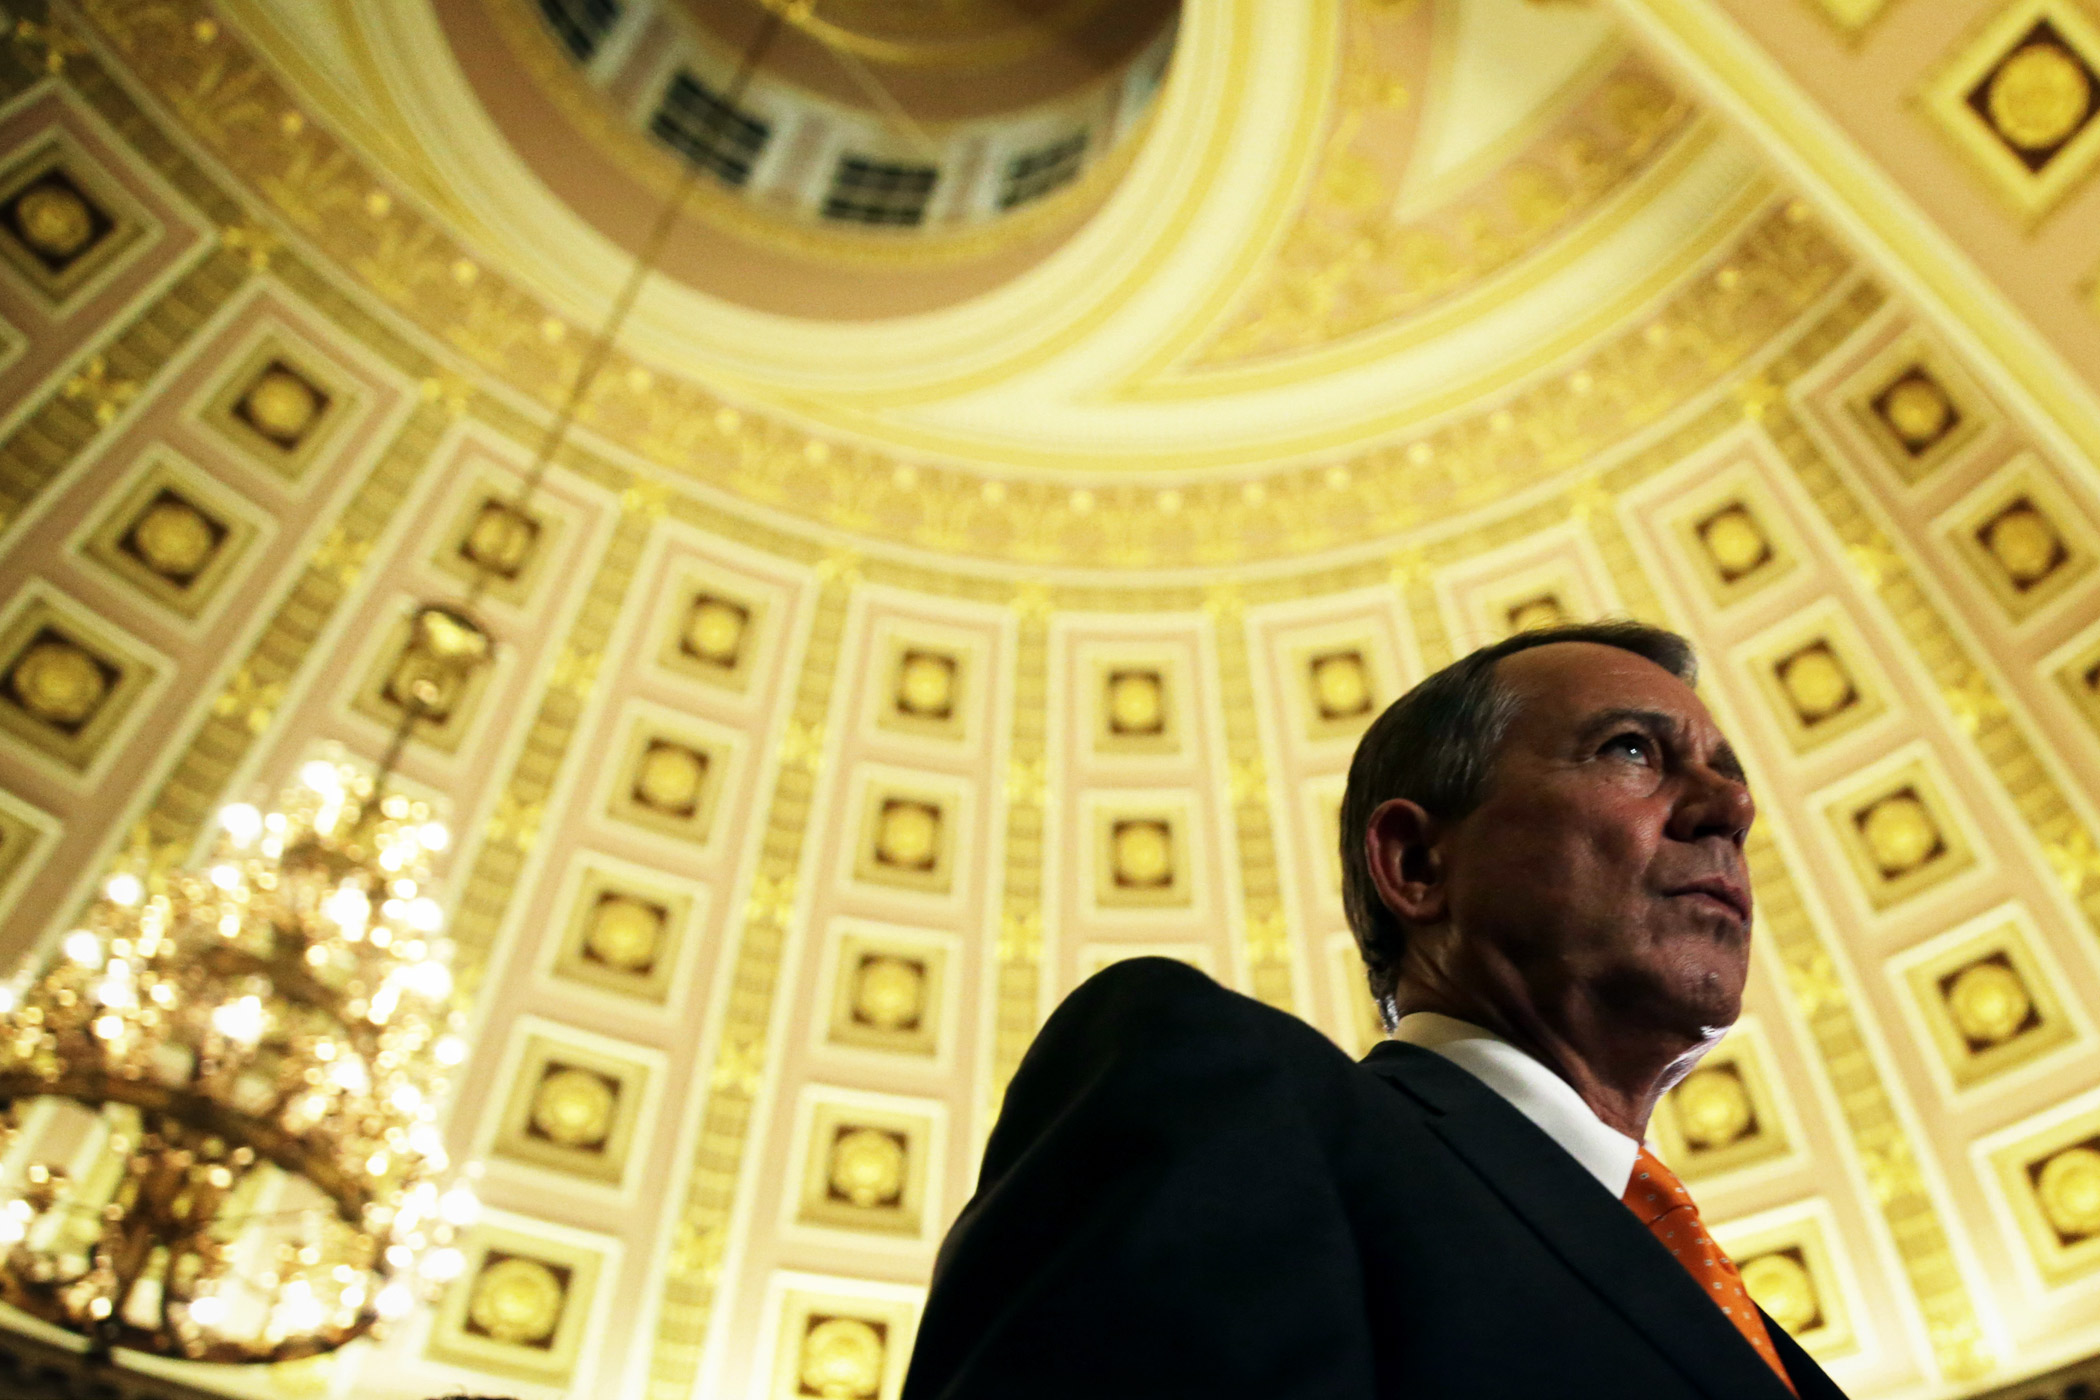 Boehner walks to the House Chamber for a vote on the debt ceiling on Capitol Hill in Washington on Oct. 16, 2013.